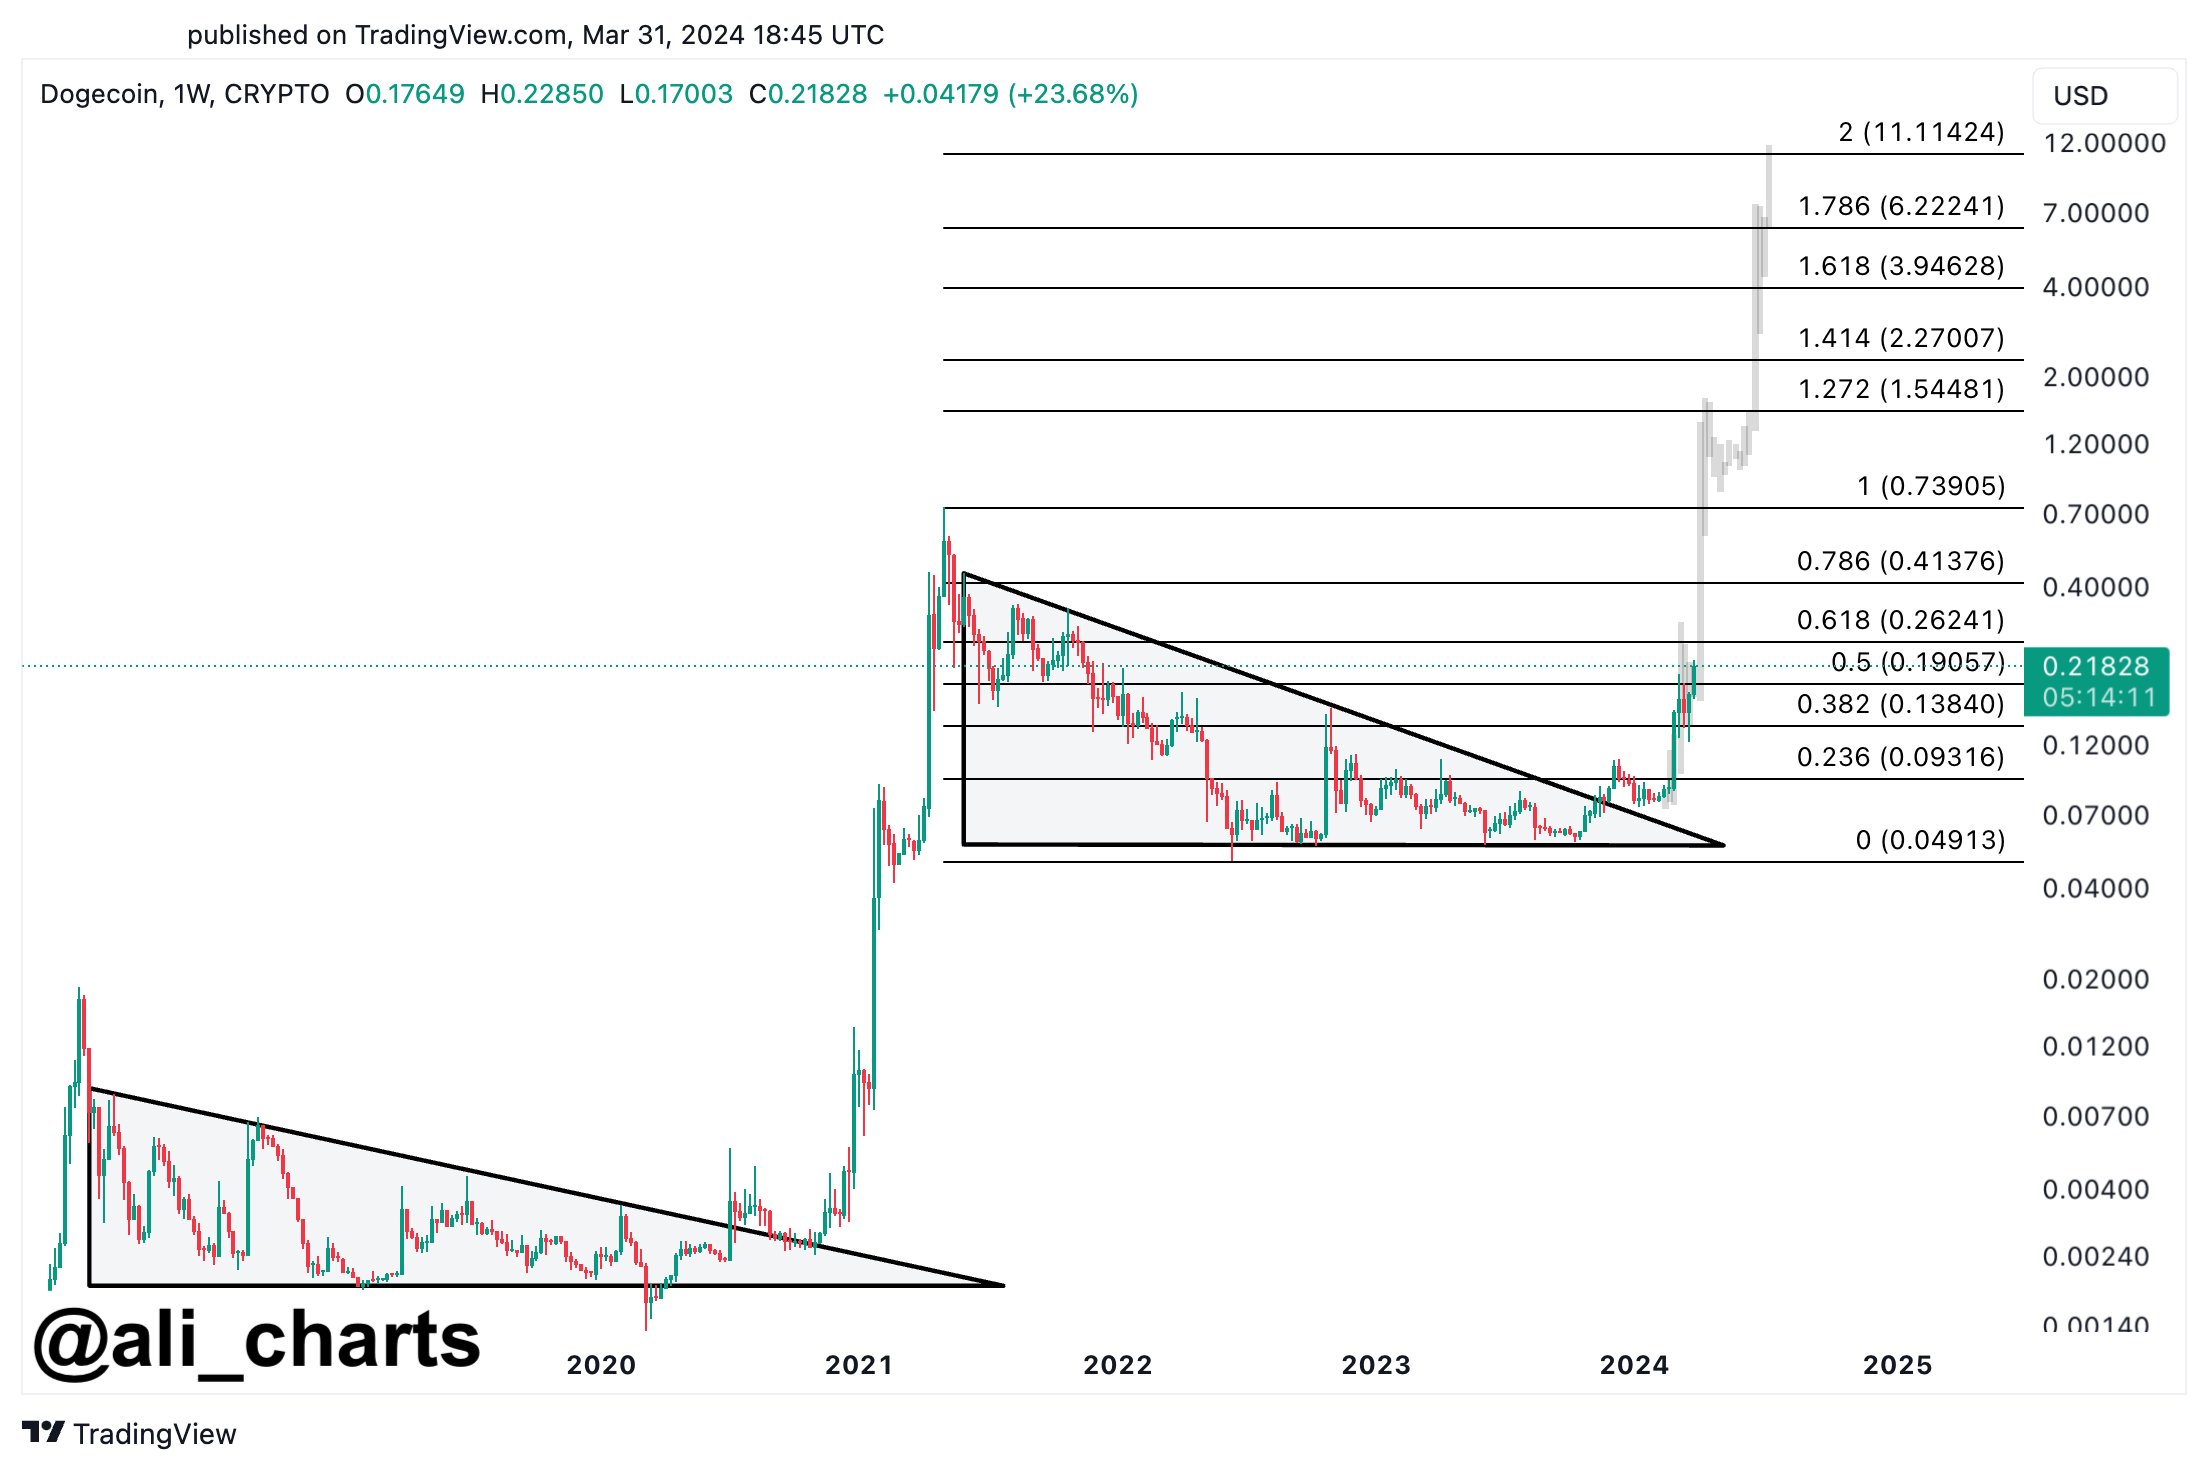 Dogecoin price projection